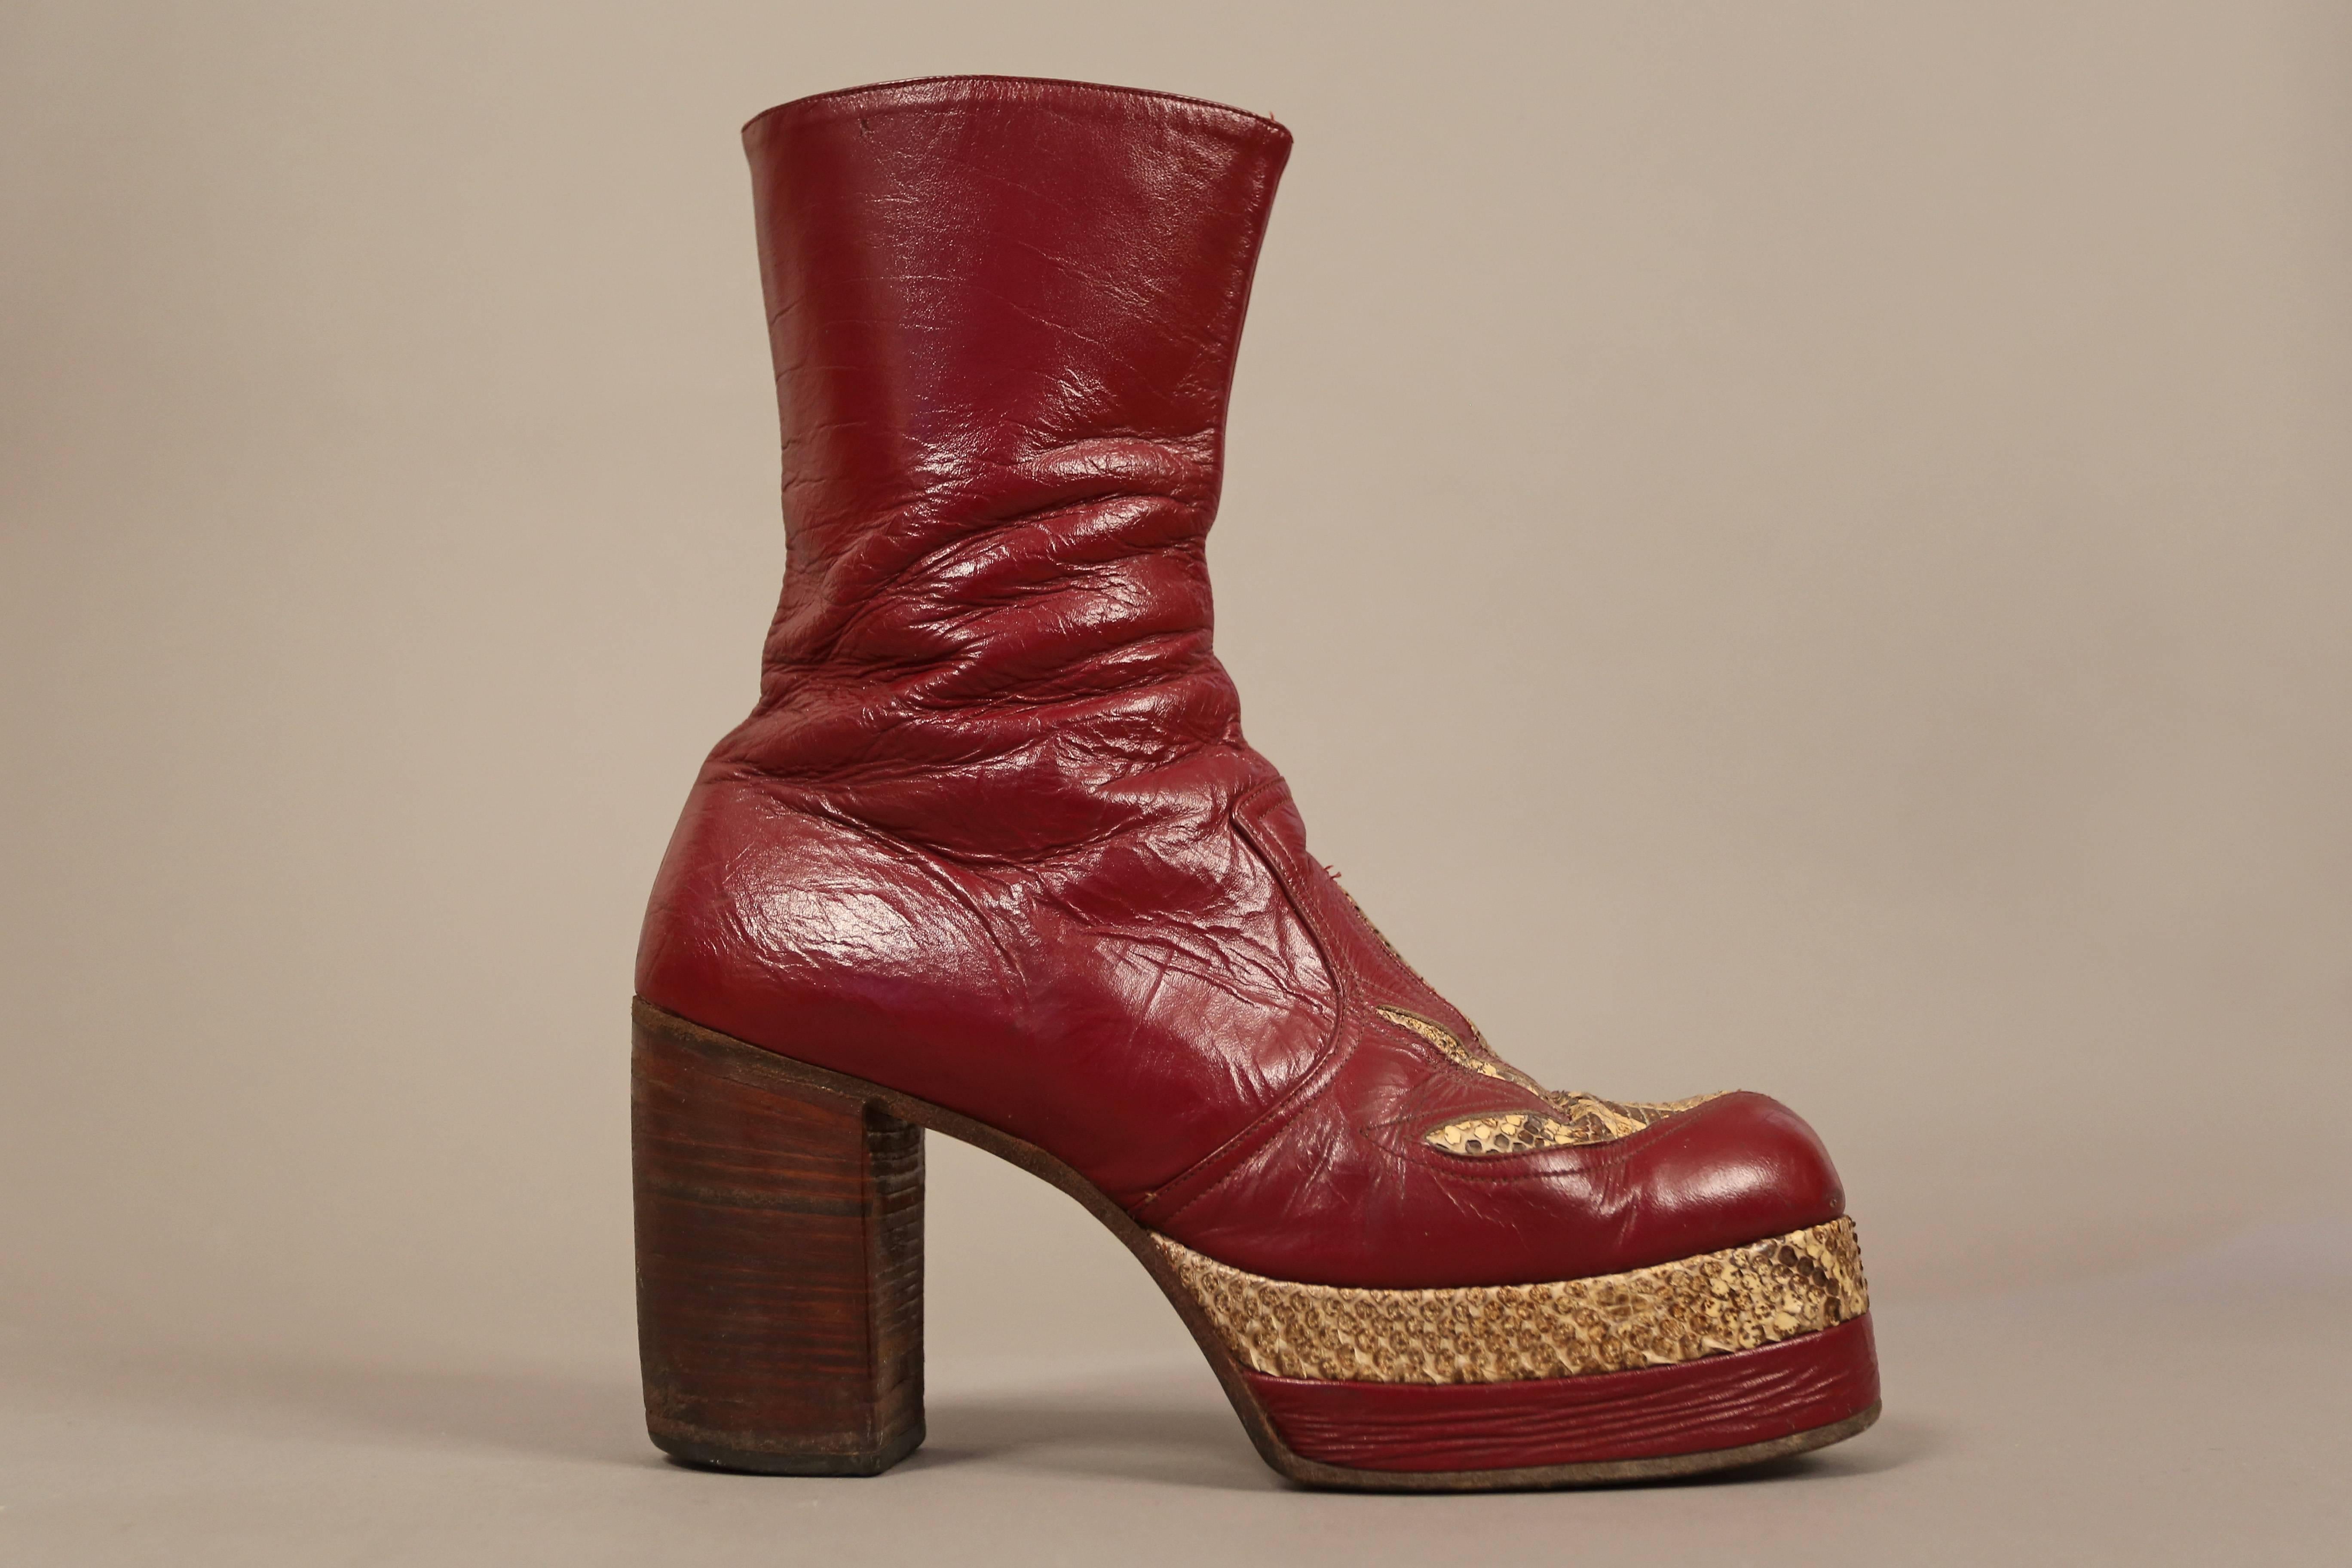 A rare pair of original 1970s mens burgundy leather platform boots with snakeskin, made in England. 

Platform 1.5